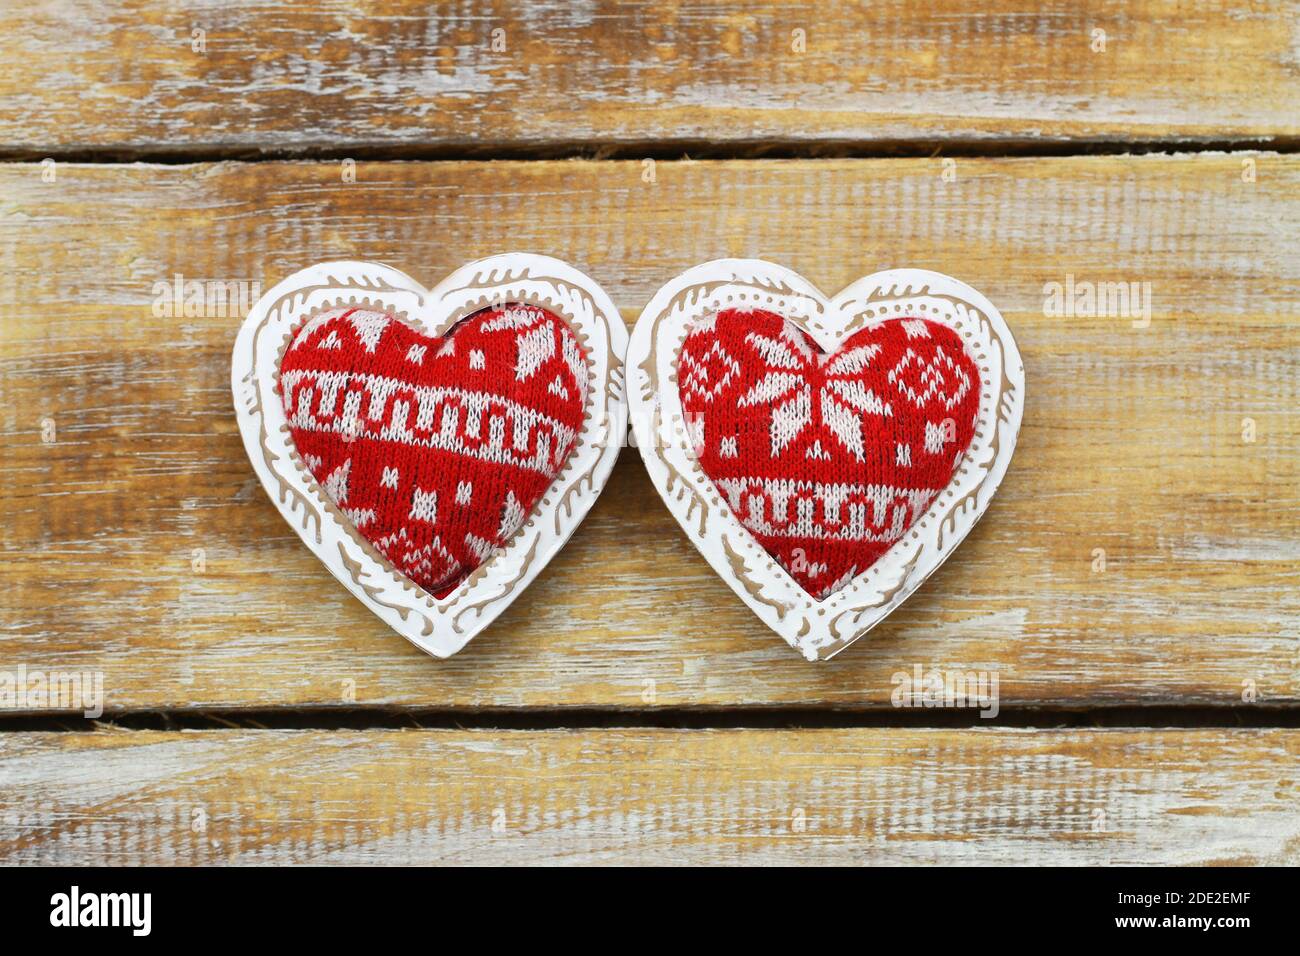 Two red knitted hearts on rustic wooden surface Stock Photo